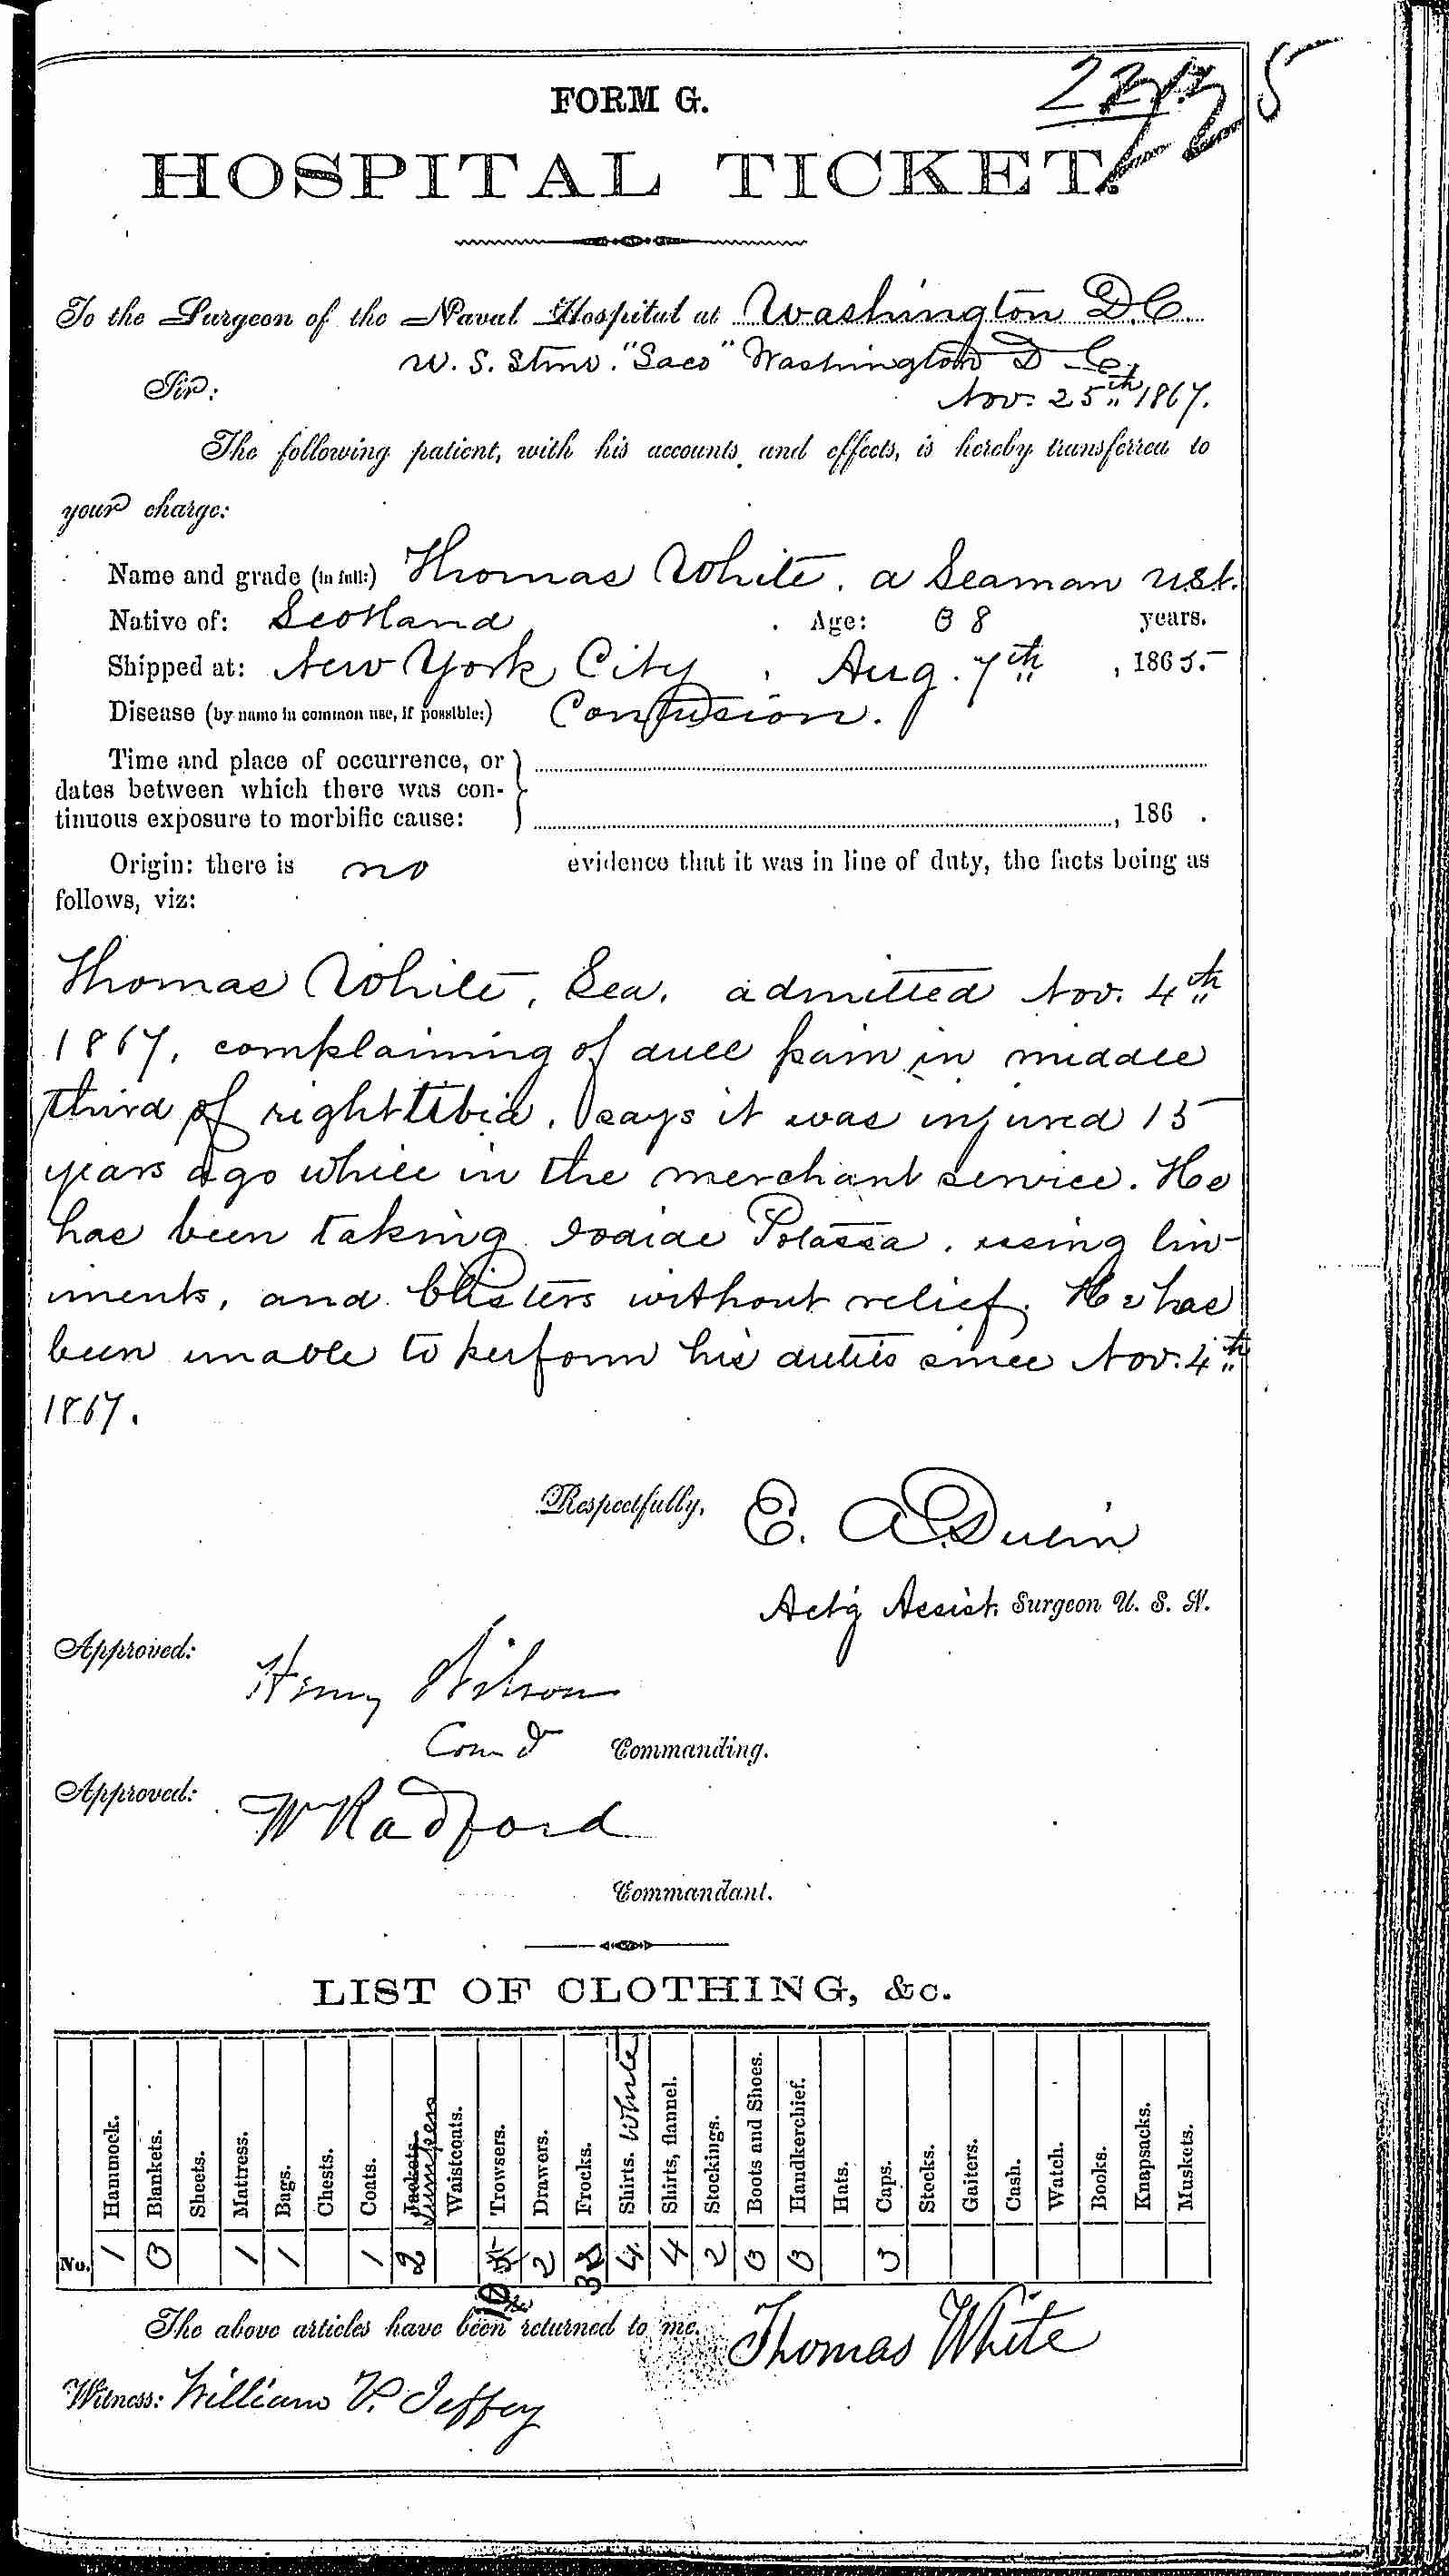 Entry for Thomas White (first admission page 1 of 2) in the log Hospital Tickets and Case Papers - Naval Hospital - Washington, D.C. - 1866-68